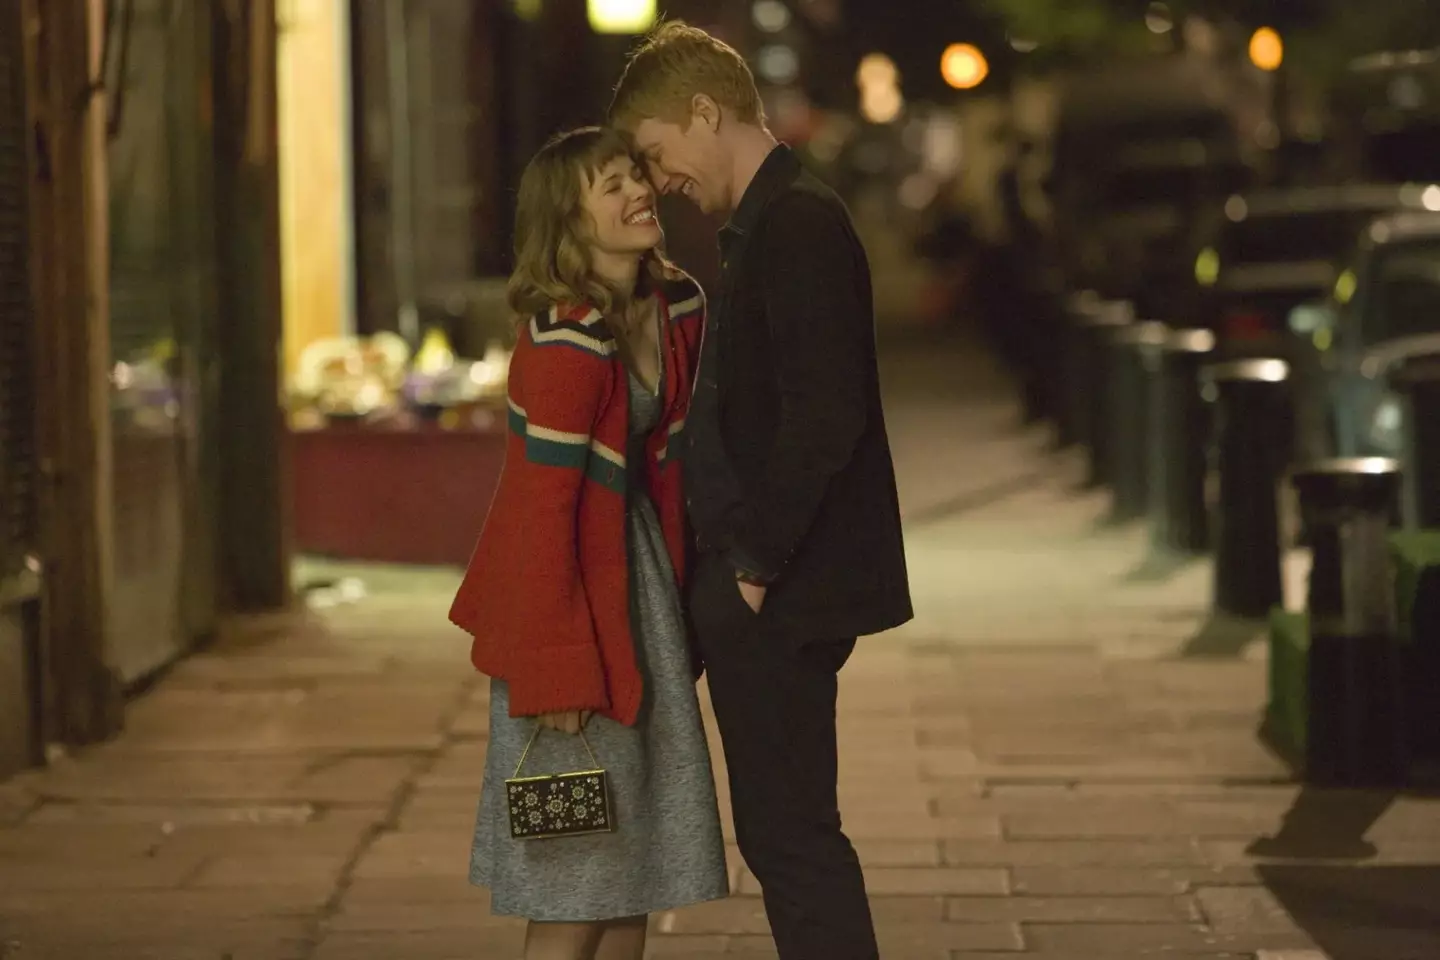 About Time came out in 2013.